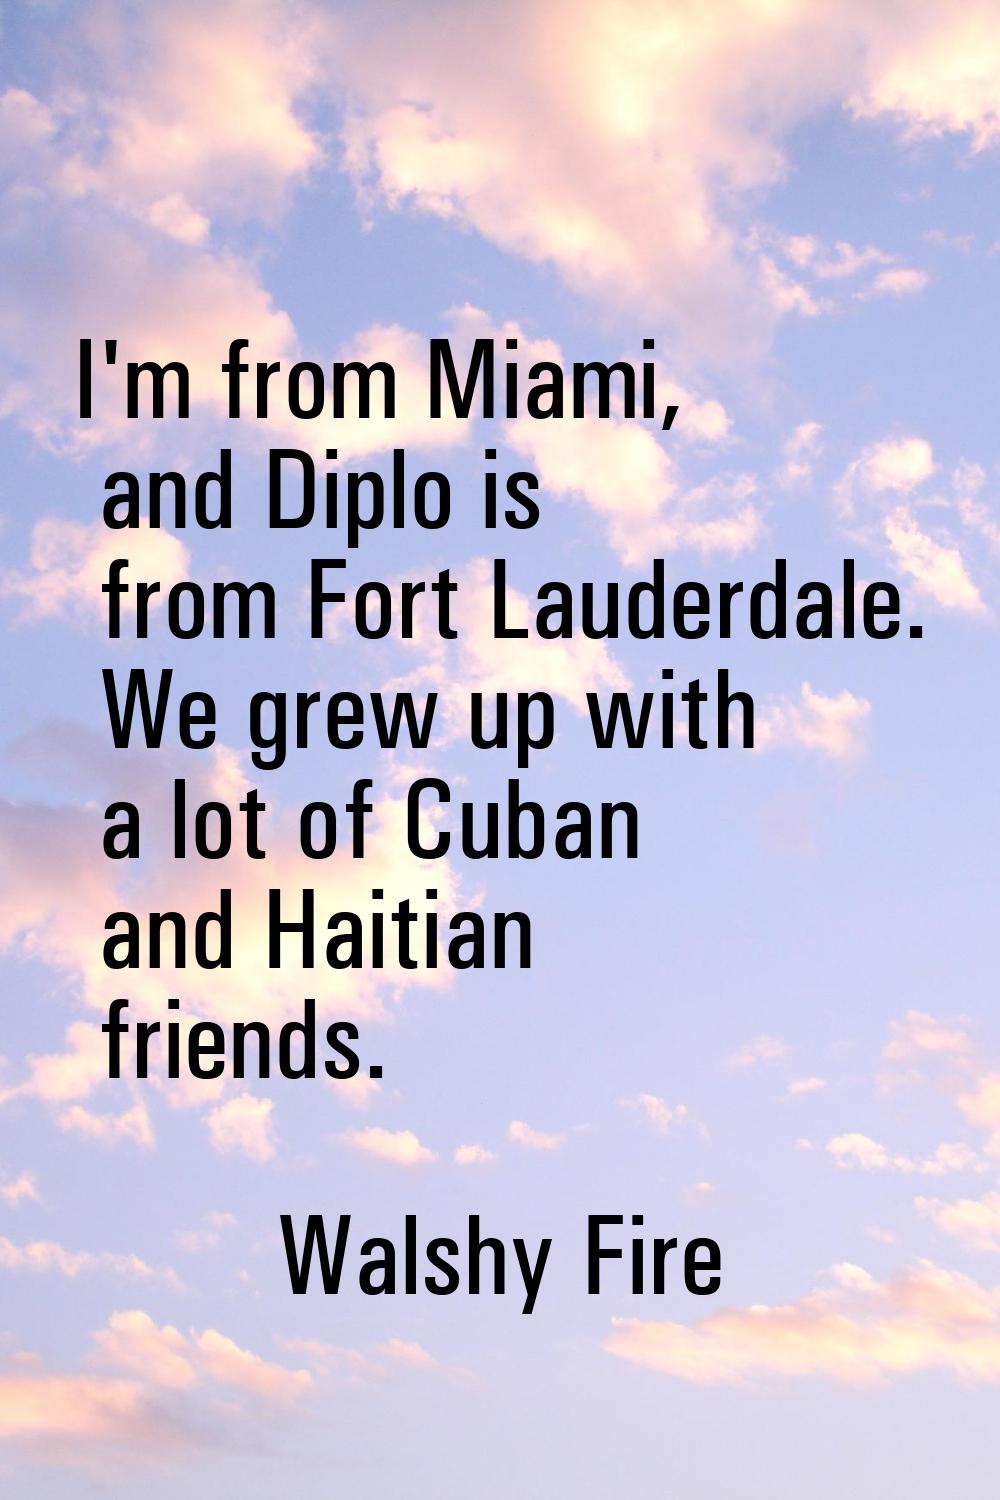 I'm from Miami, and Diplo is from Fort Lauderdale. We grew up with a lot of Cuban and Haitian frien